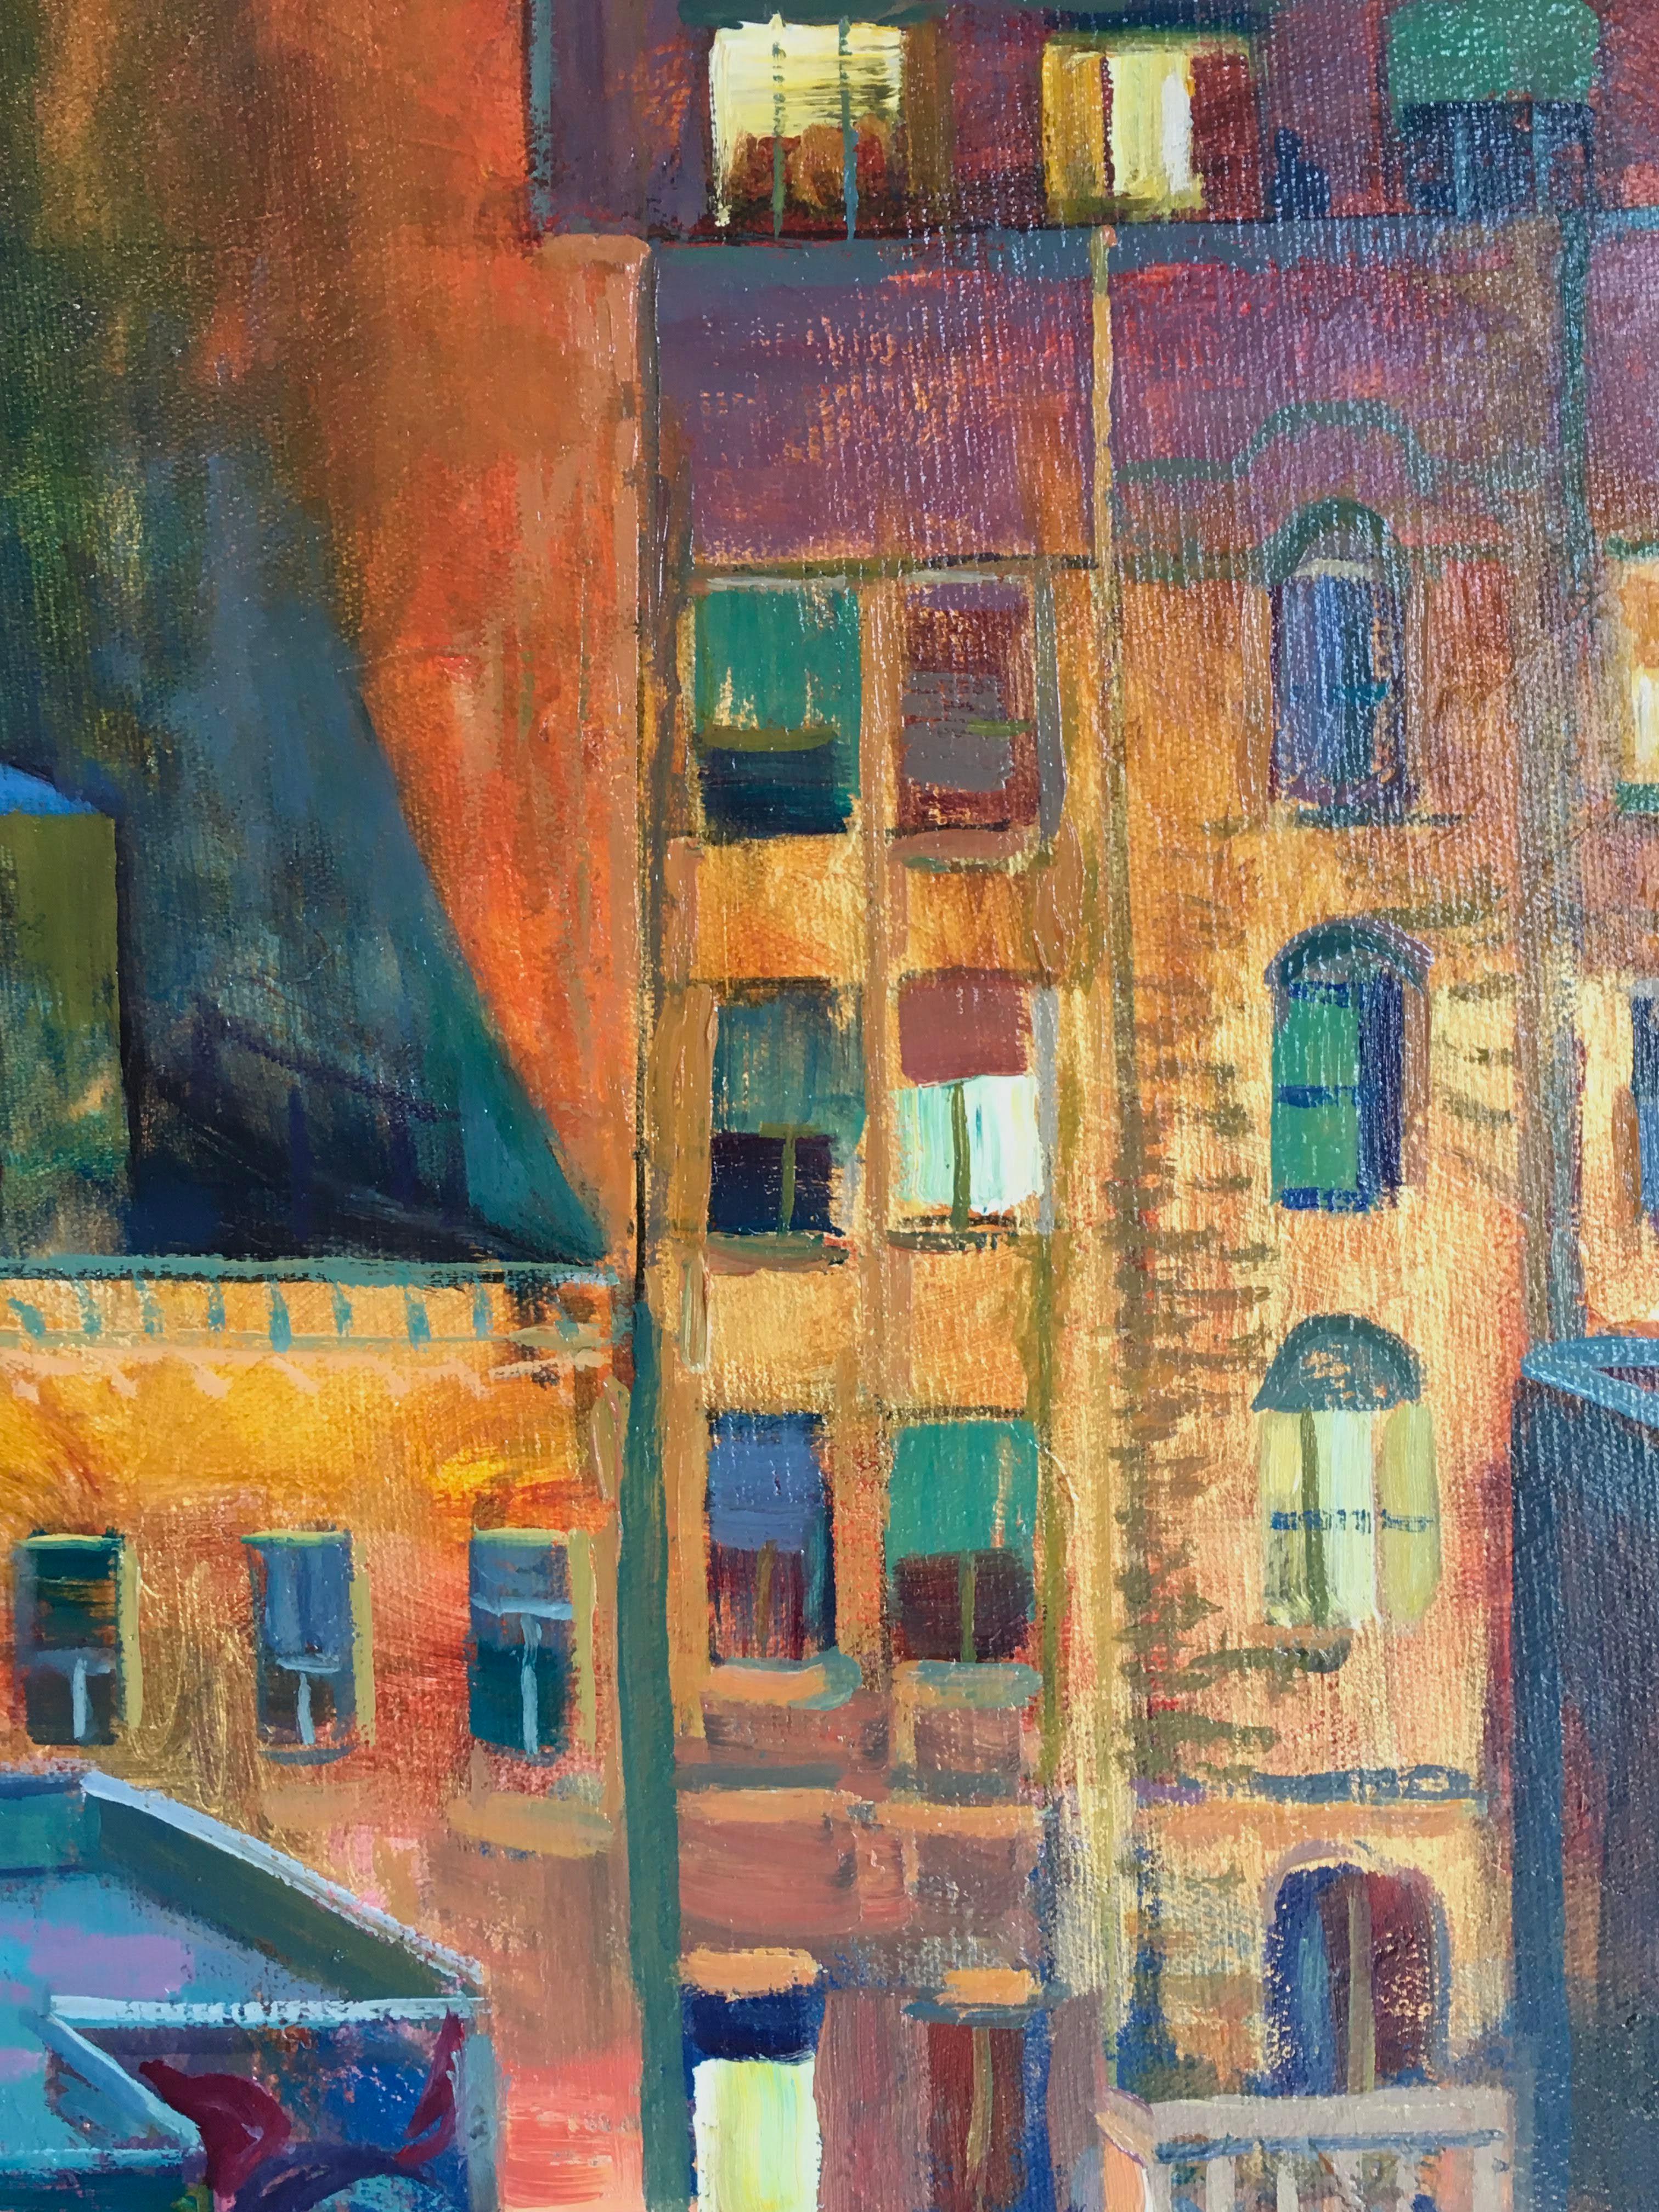 Rooftop Nights - New York original city landscape painting Contemporary Art 21st - Gray Landscape Painting by Juan del Pozo